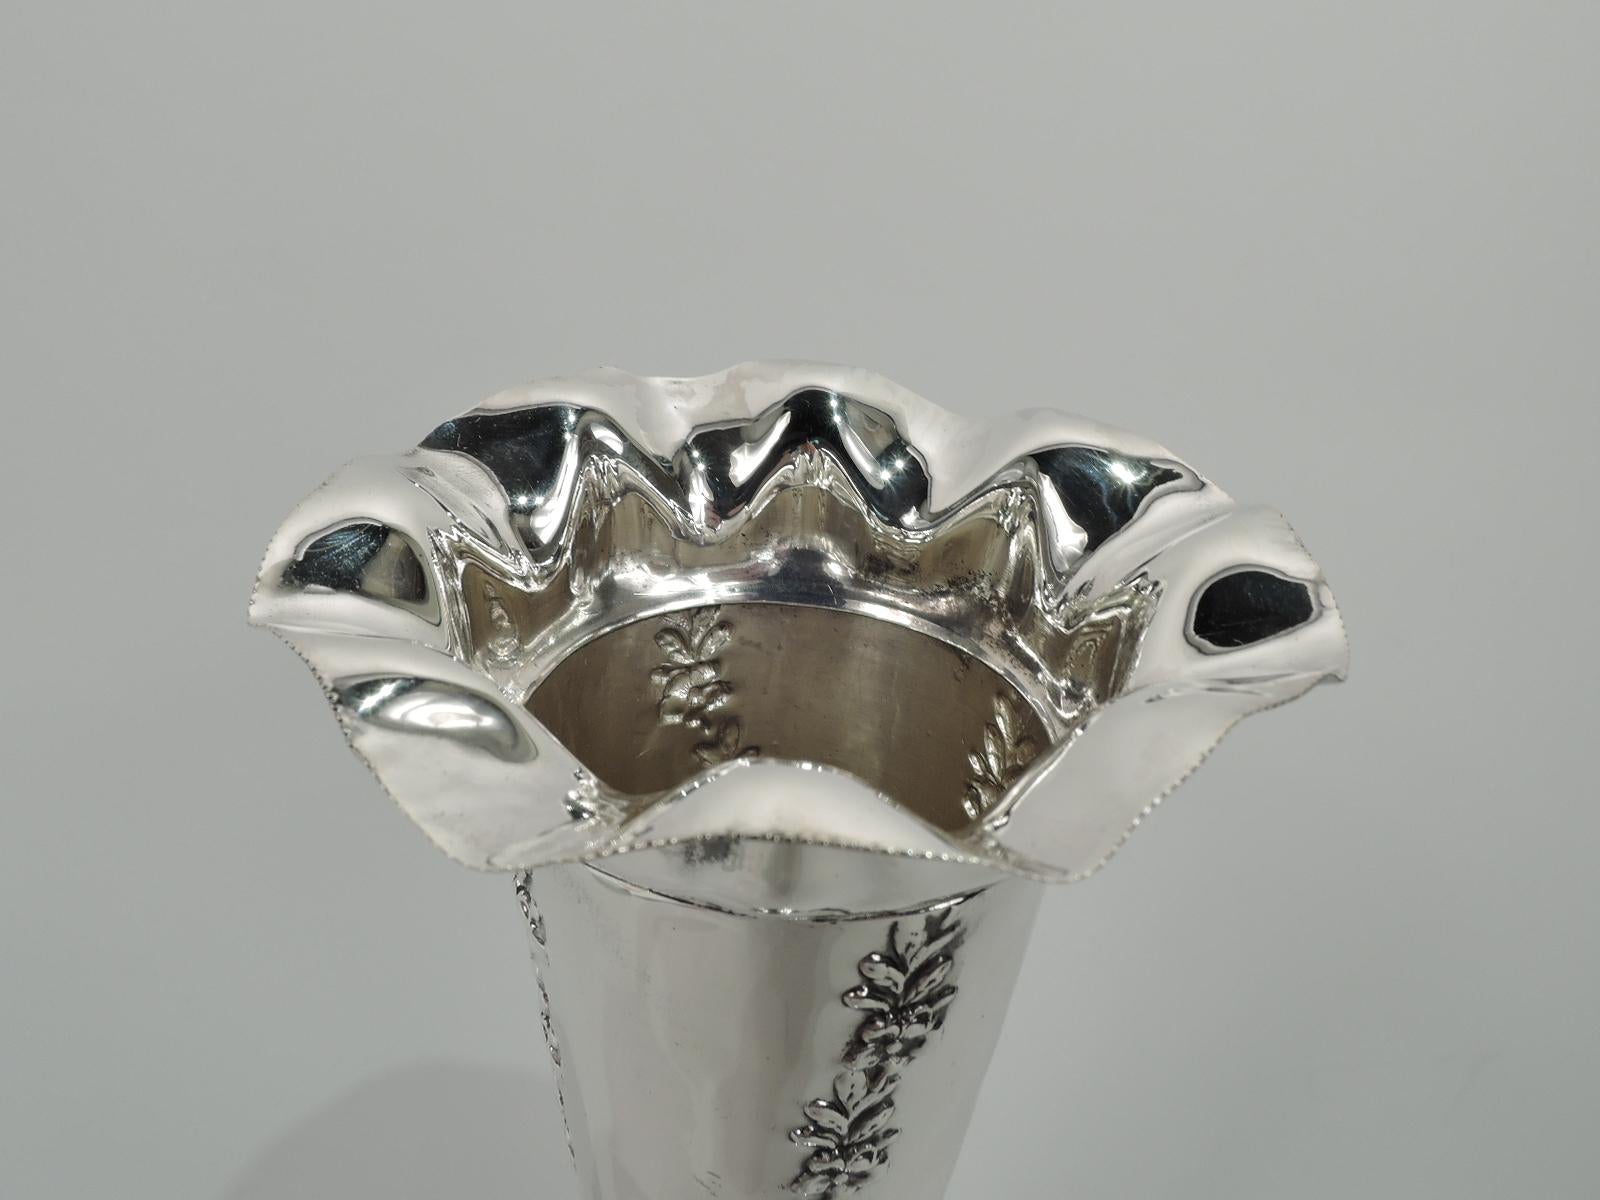 Edwardian sterling silver vase. Made by Alexander Clark Mfg. & Co in Birmingham in 1904. Conical with ruffled rim and round and stepped foot. Twisted fluting in form of chased garlands. Fully marked. Weighted.